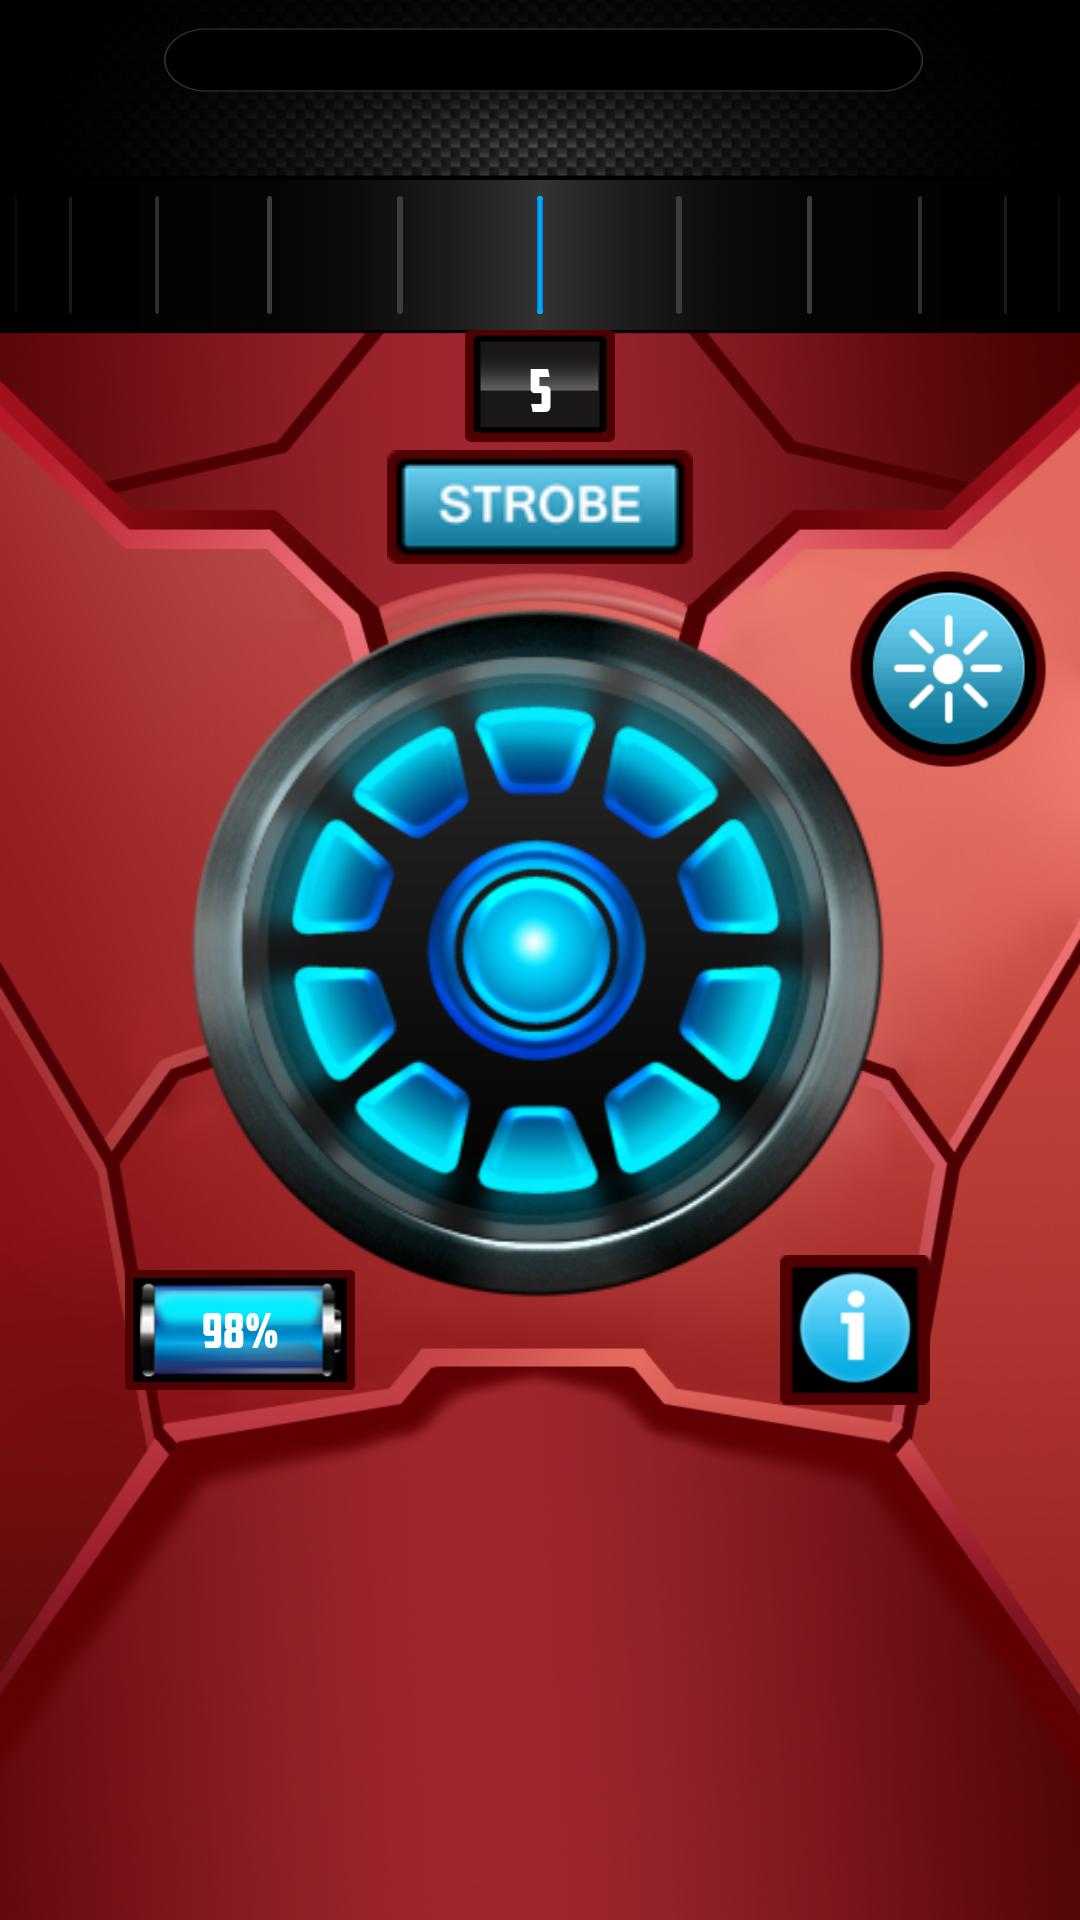 Arc Reactor Flashlight For Android Apk Download - arc reactor roblox